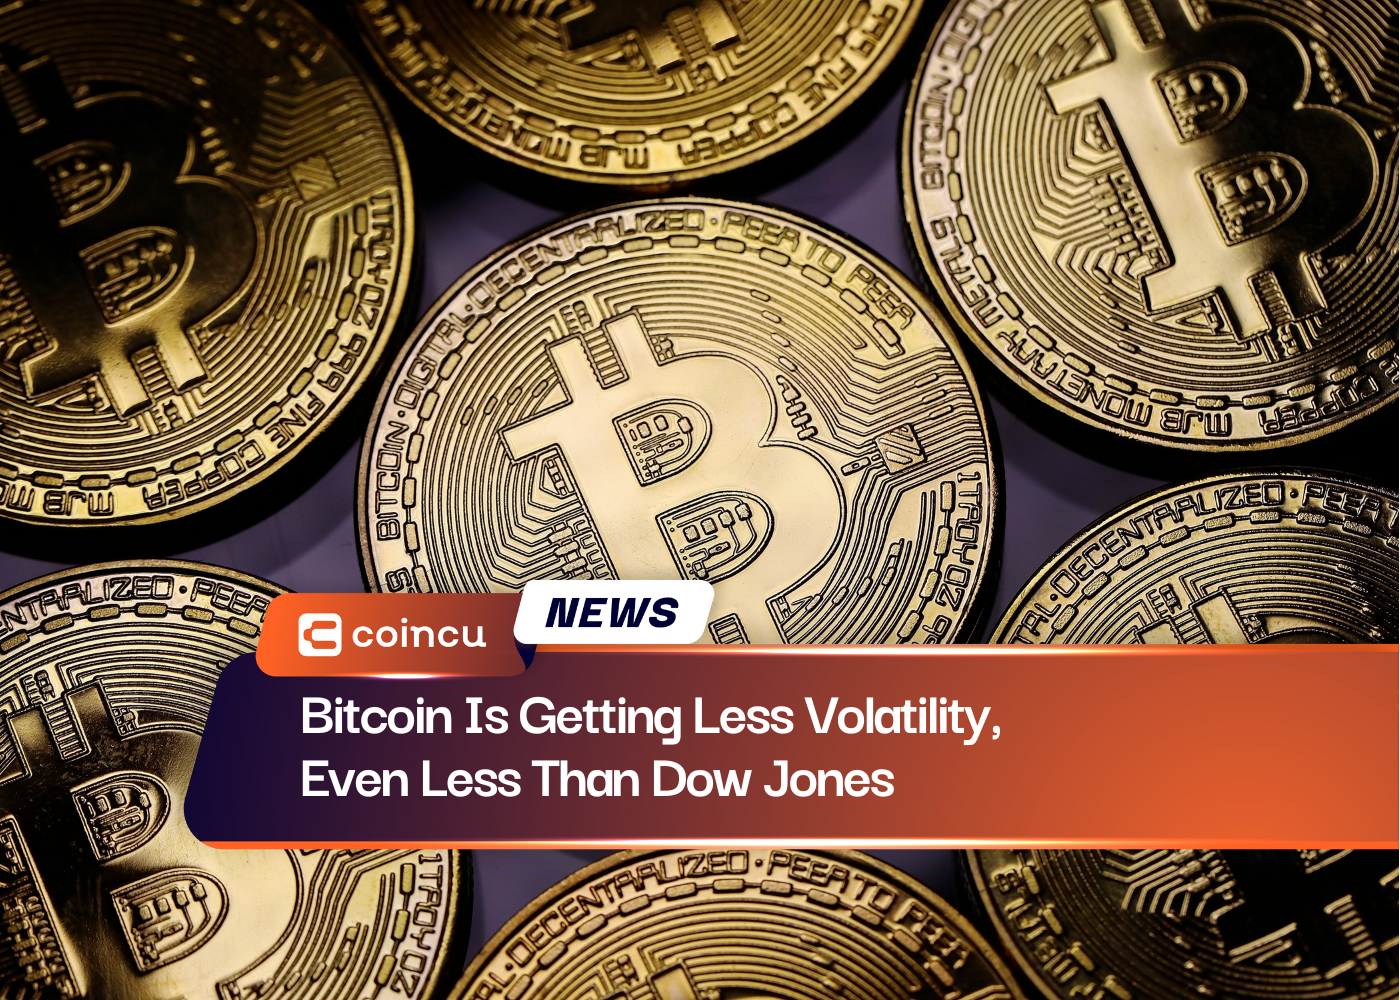 Bitcoin Is Getting Less Volatility, Even Less Than Dow Jones